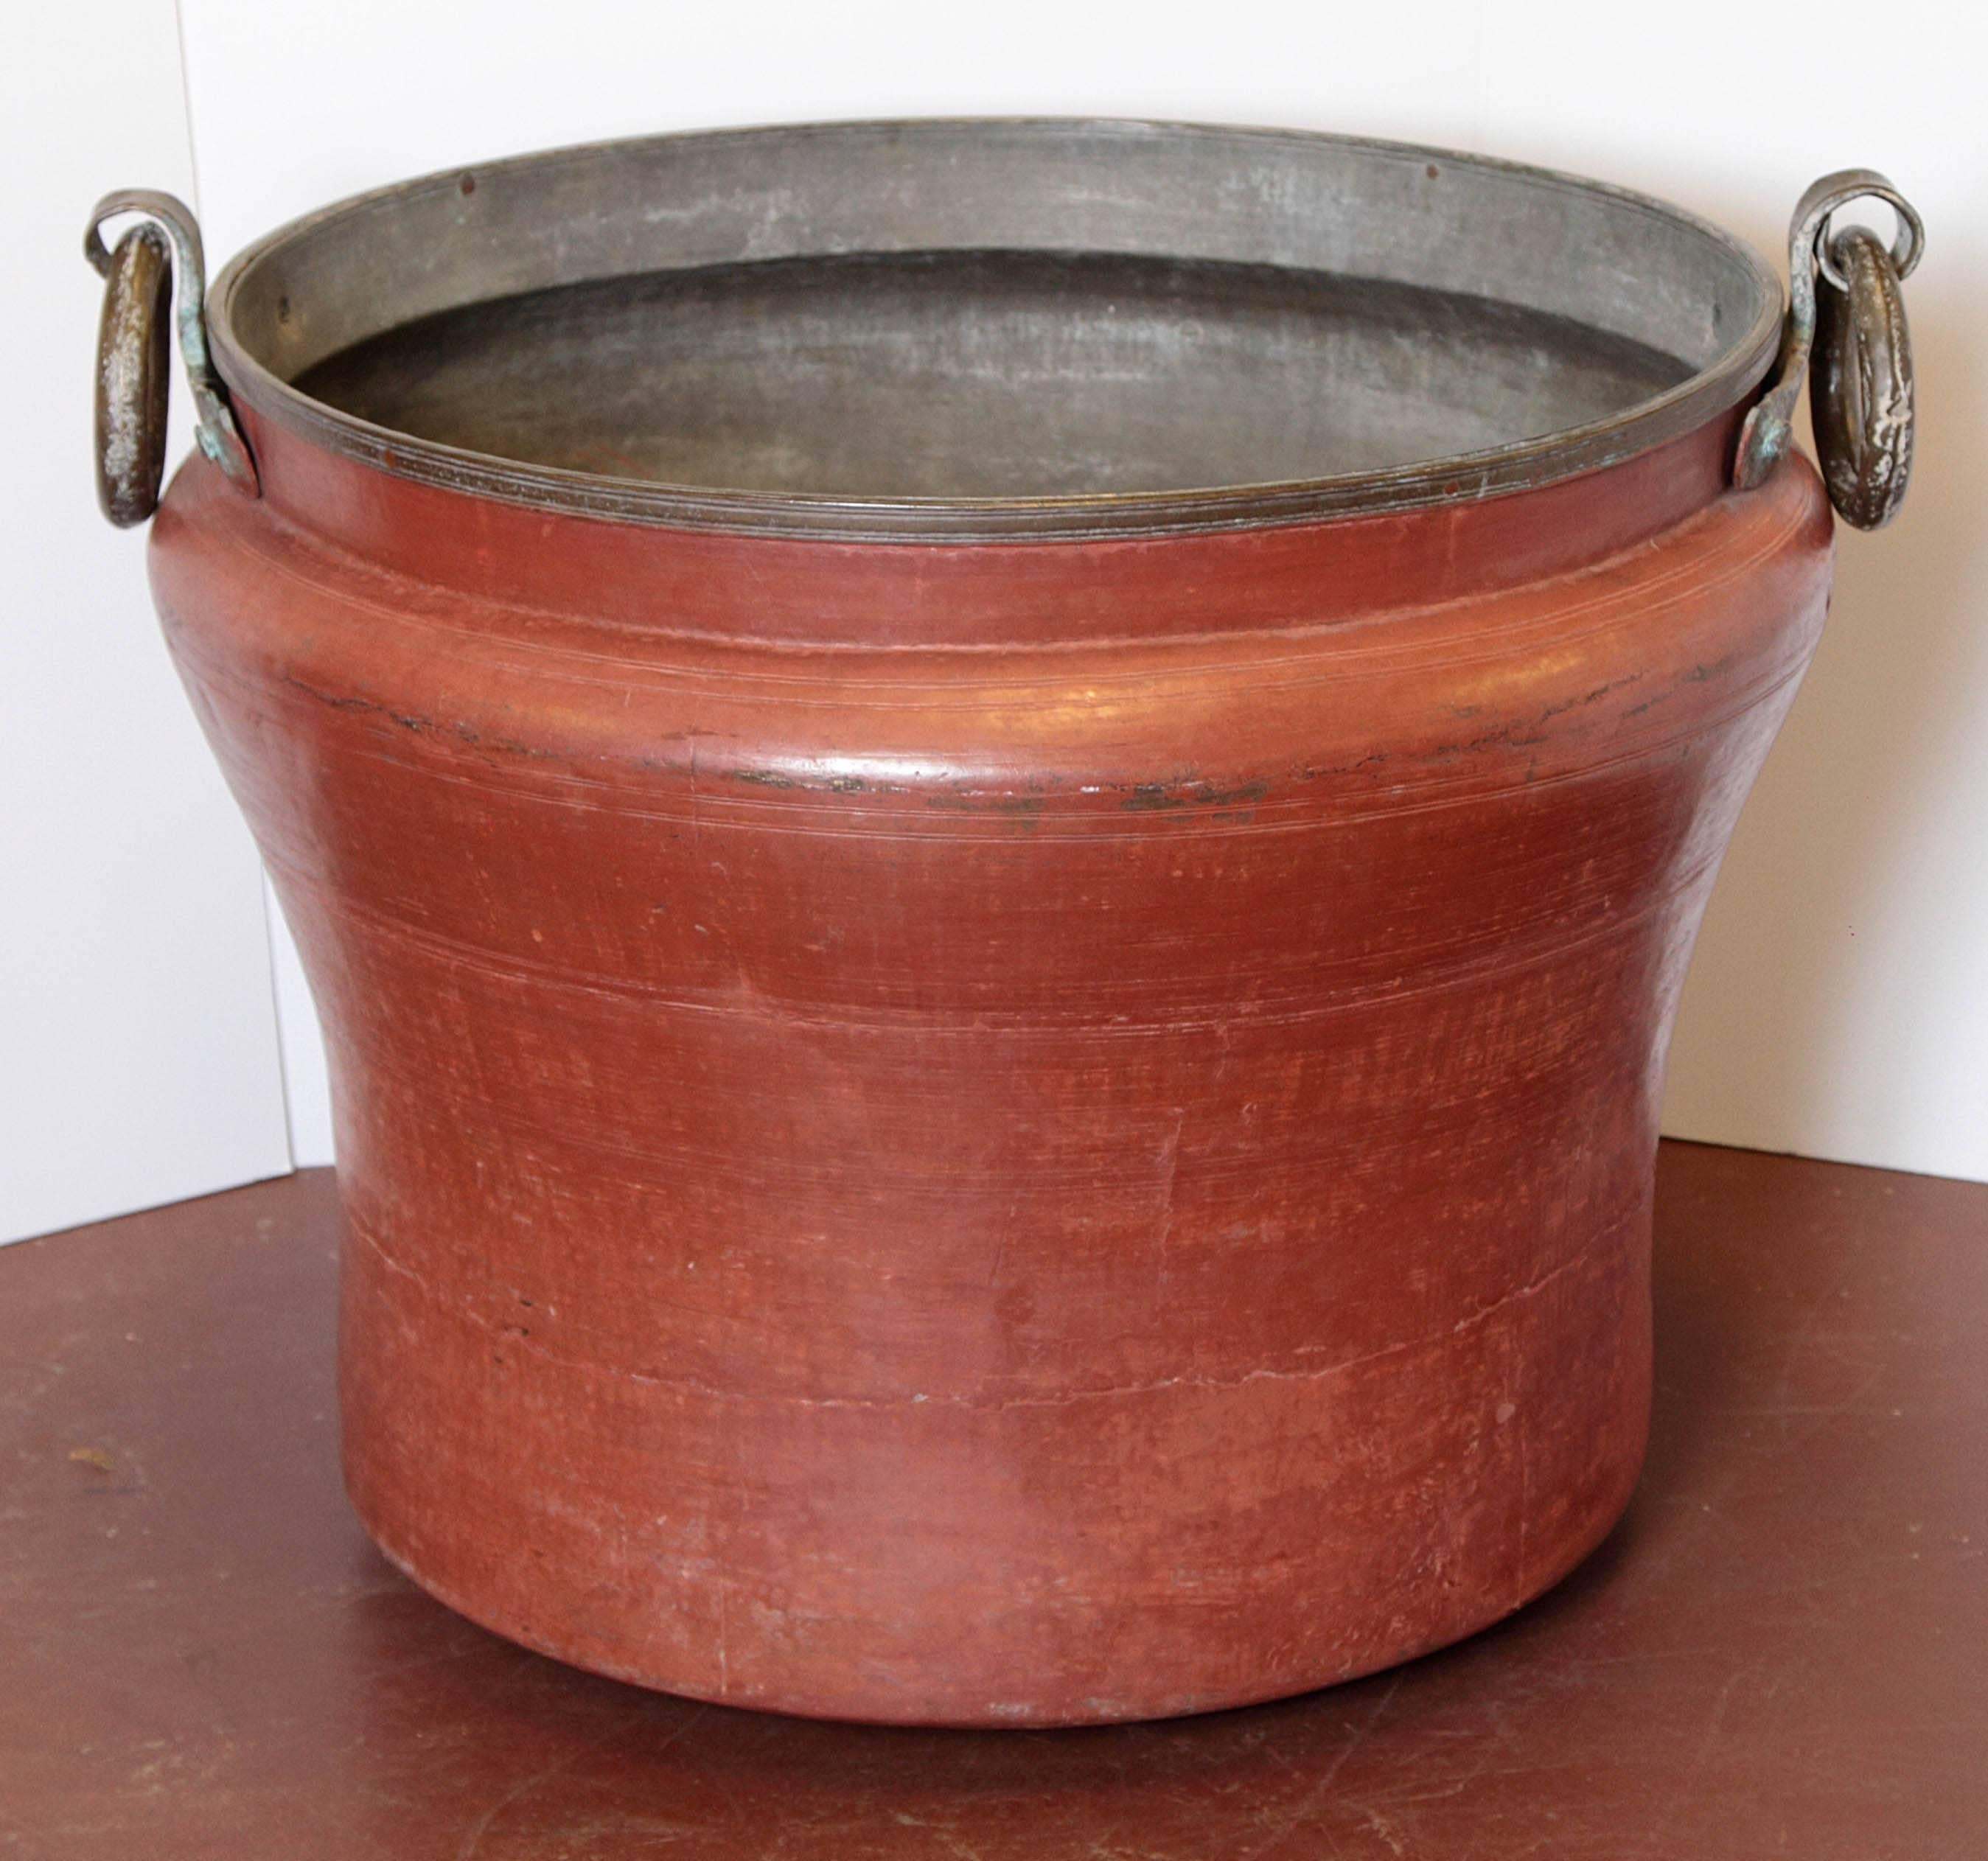 Massive copper pot with hand-forged handles. Tin lined.